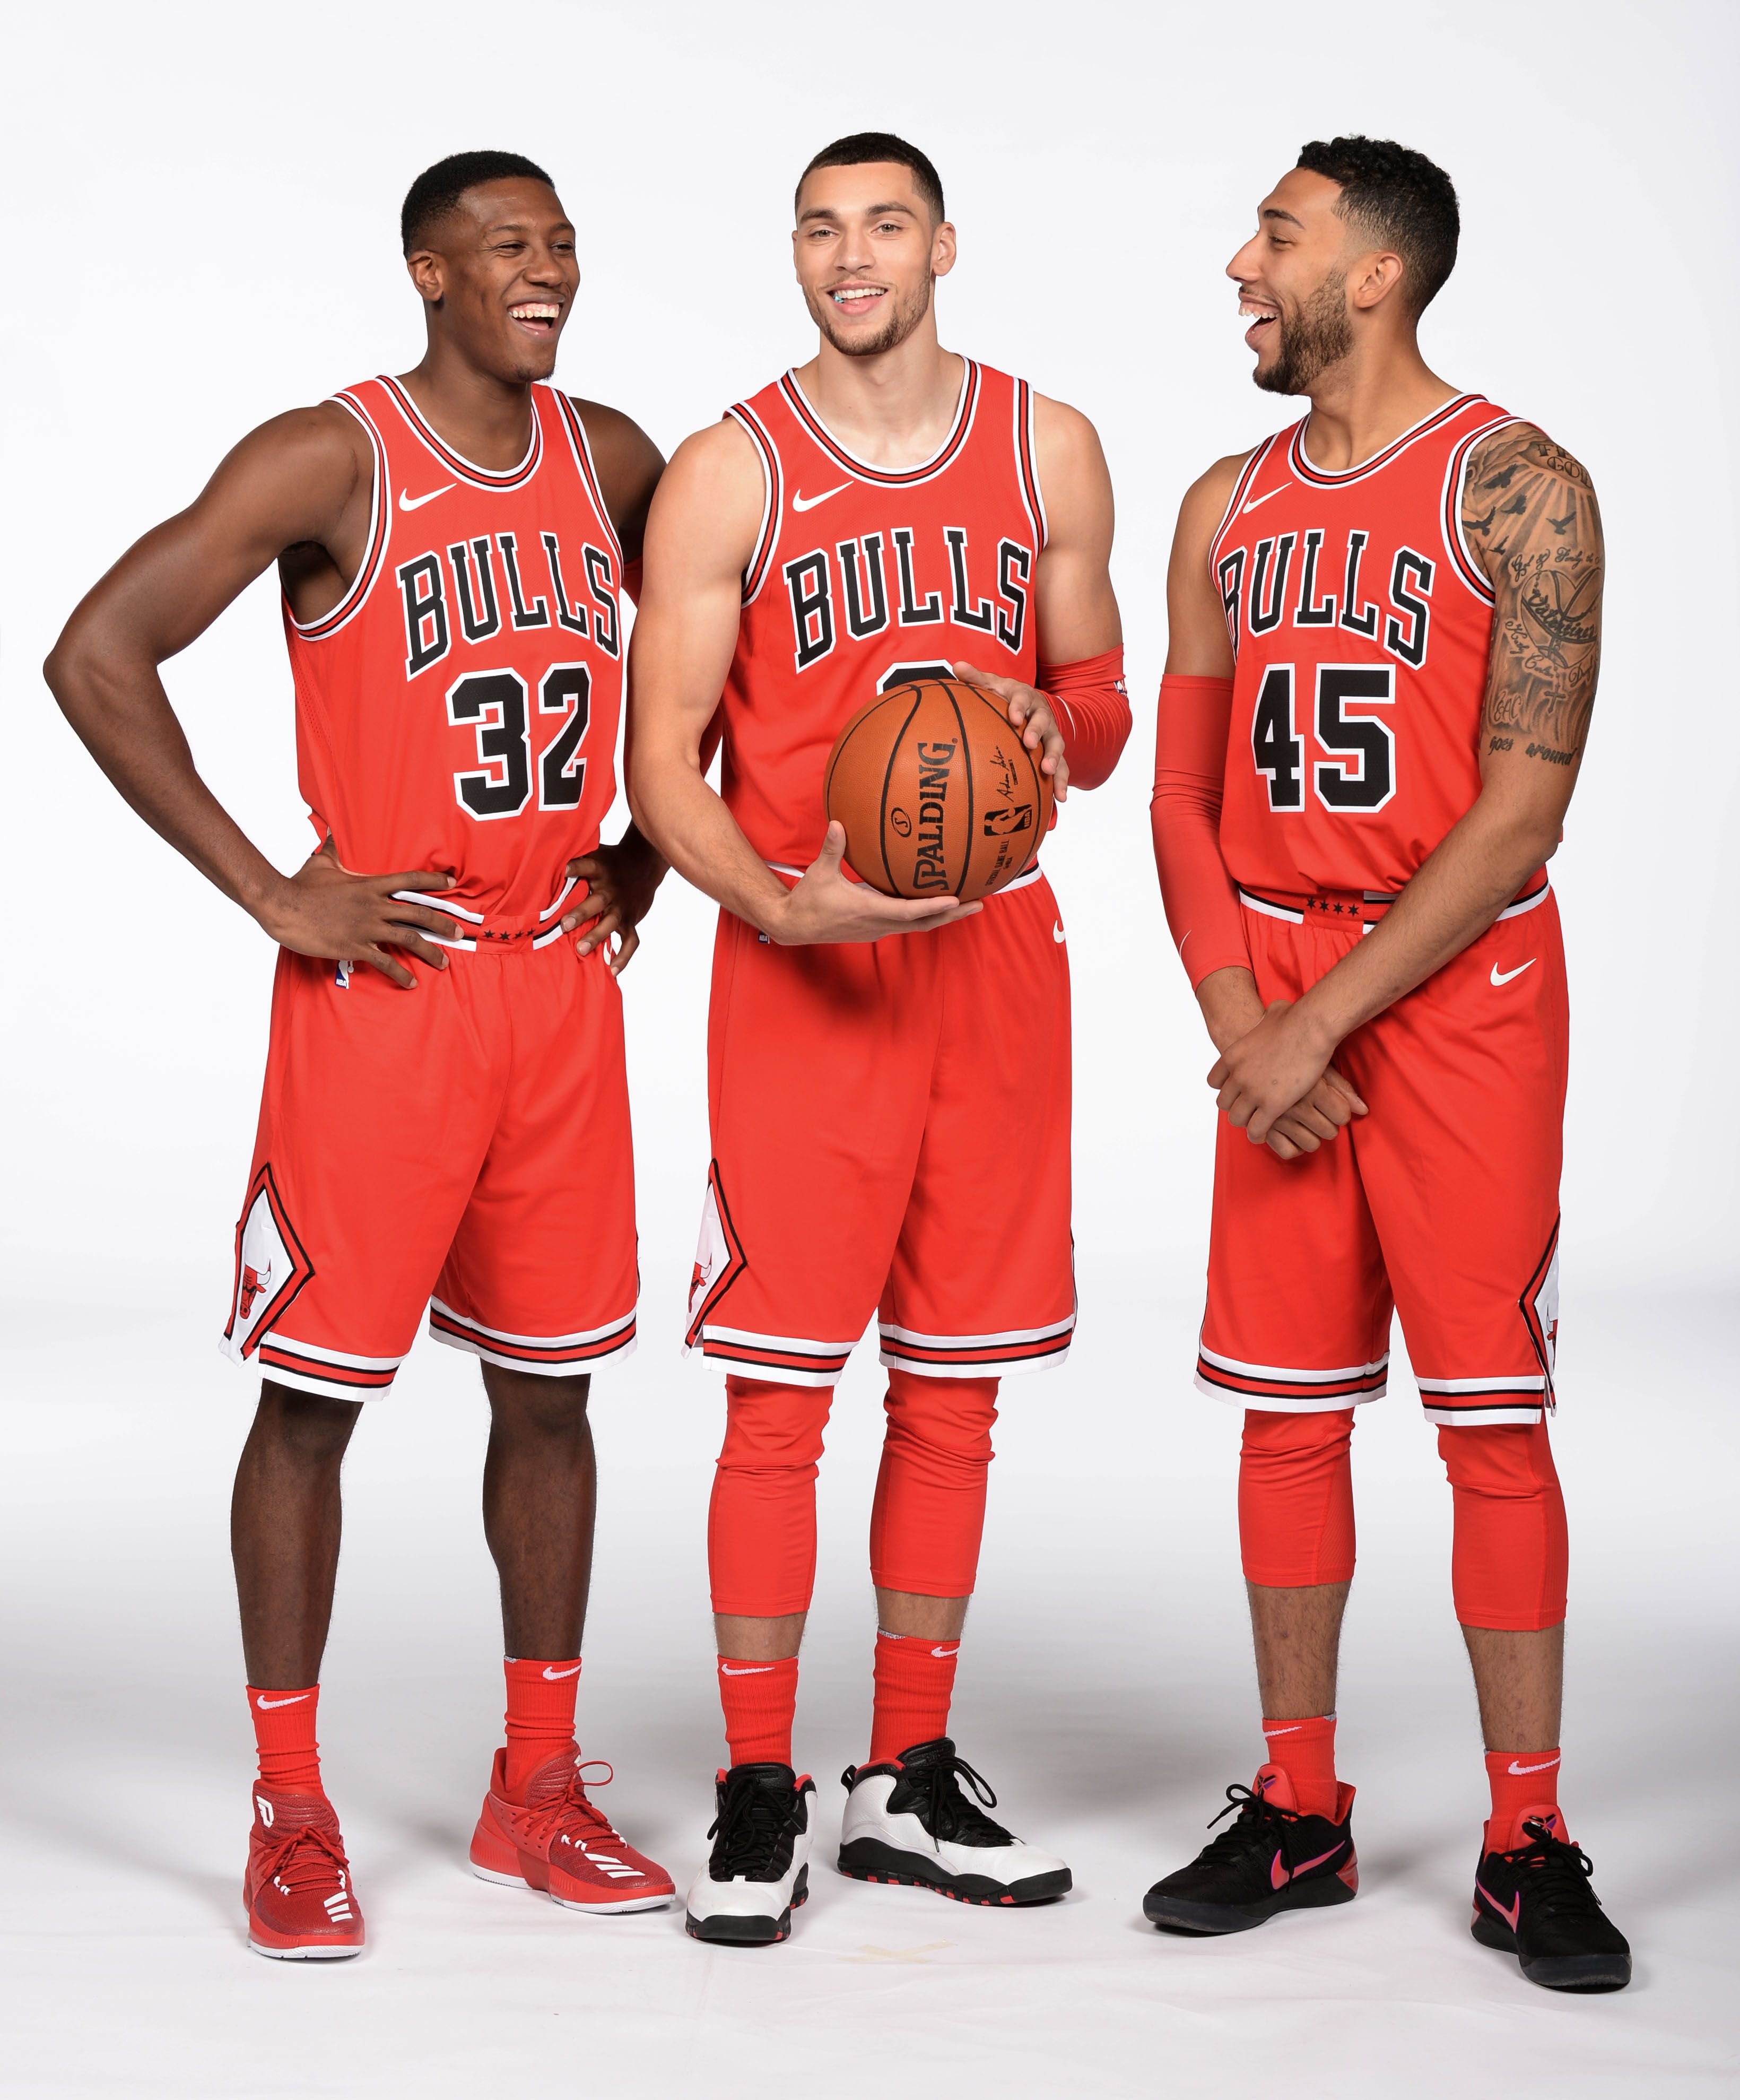 Chicago Bulls Hardly Represented In Nba General